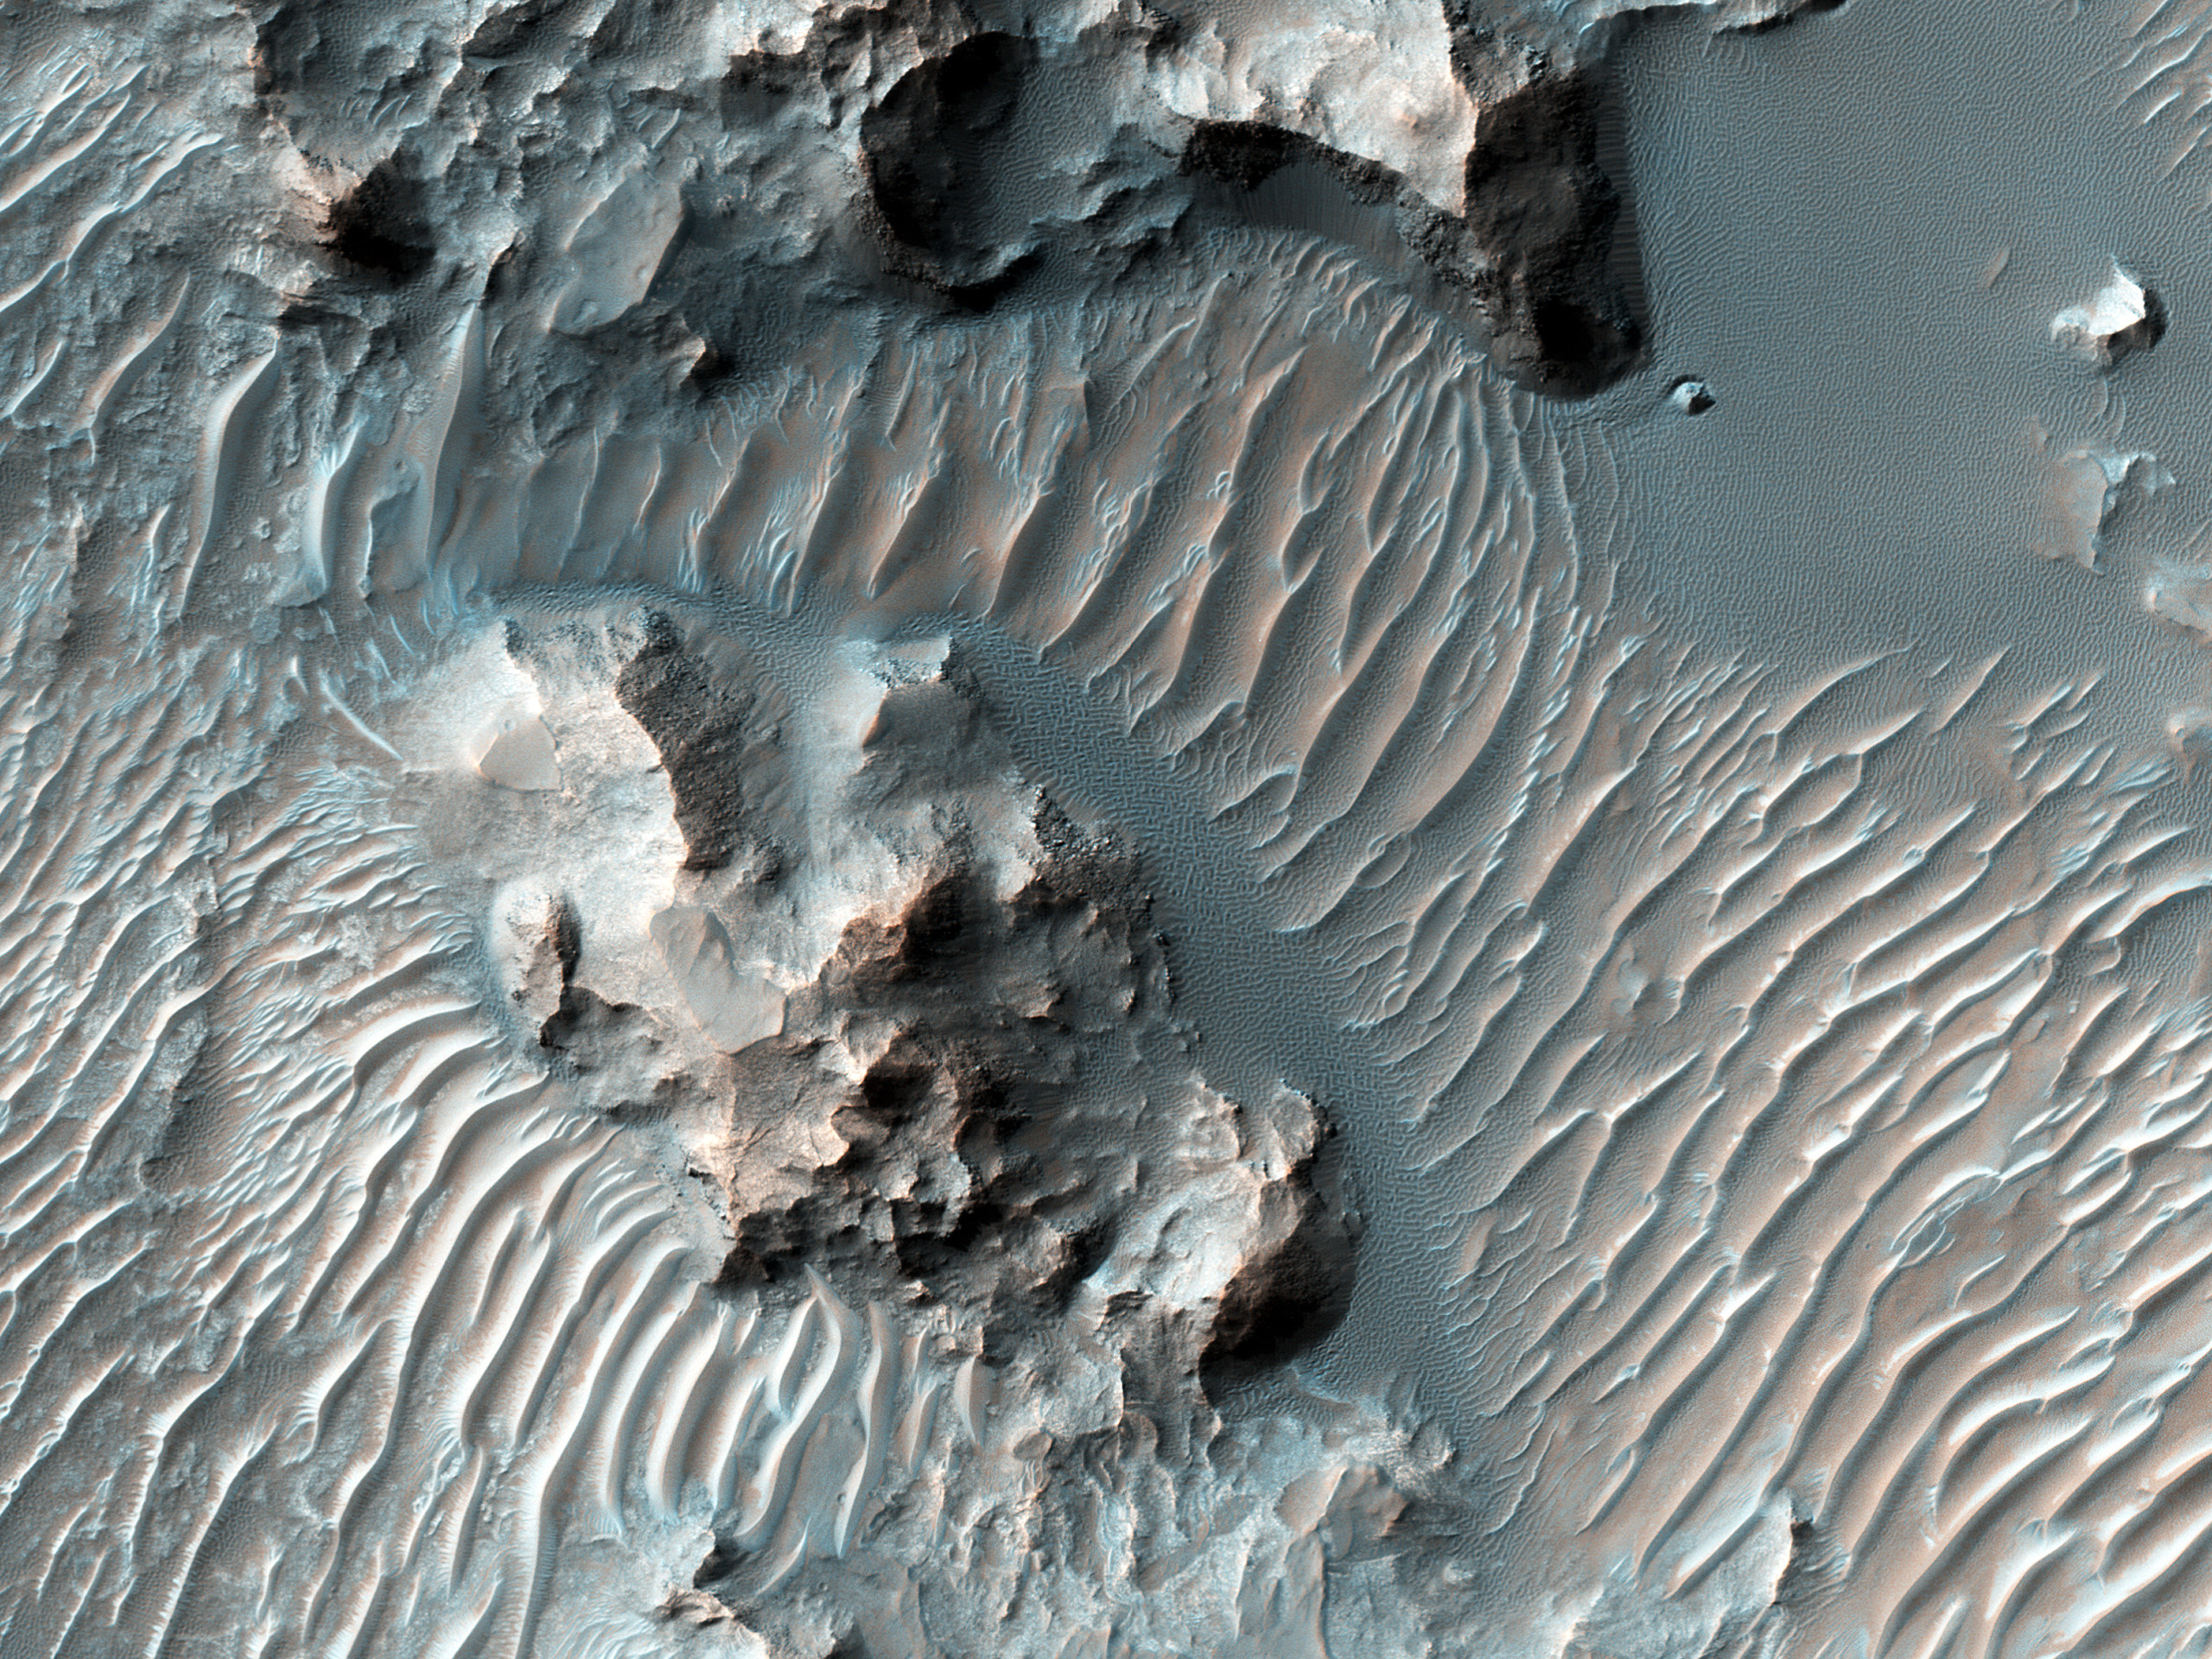 NASA's HiRISE camera captures large, heavily-infilled crater on Mars